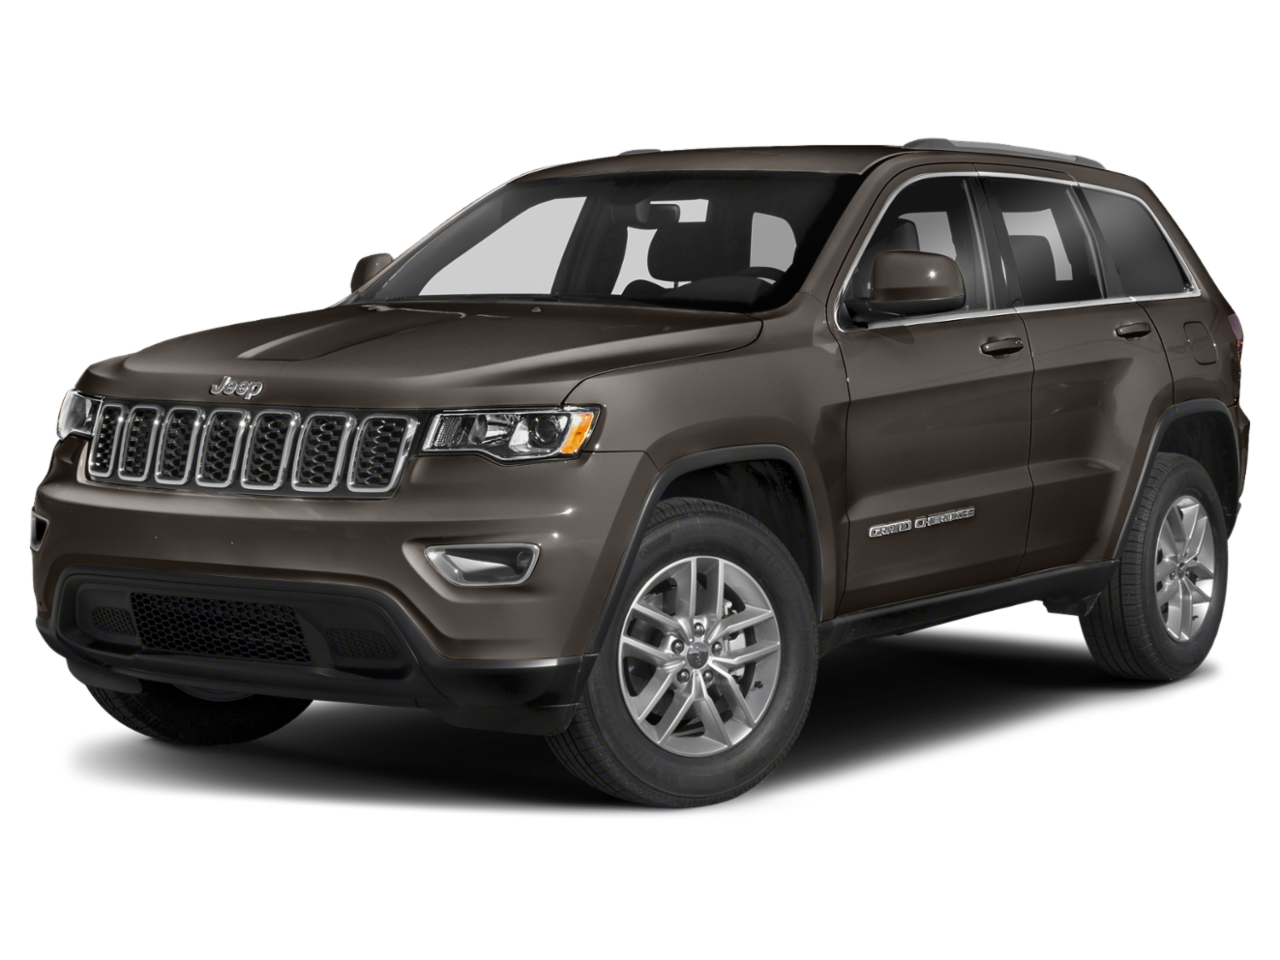 2021 Jeep Grand Cherokee lease $1059 Mo $0 Down Leases Available